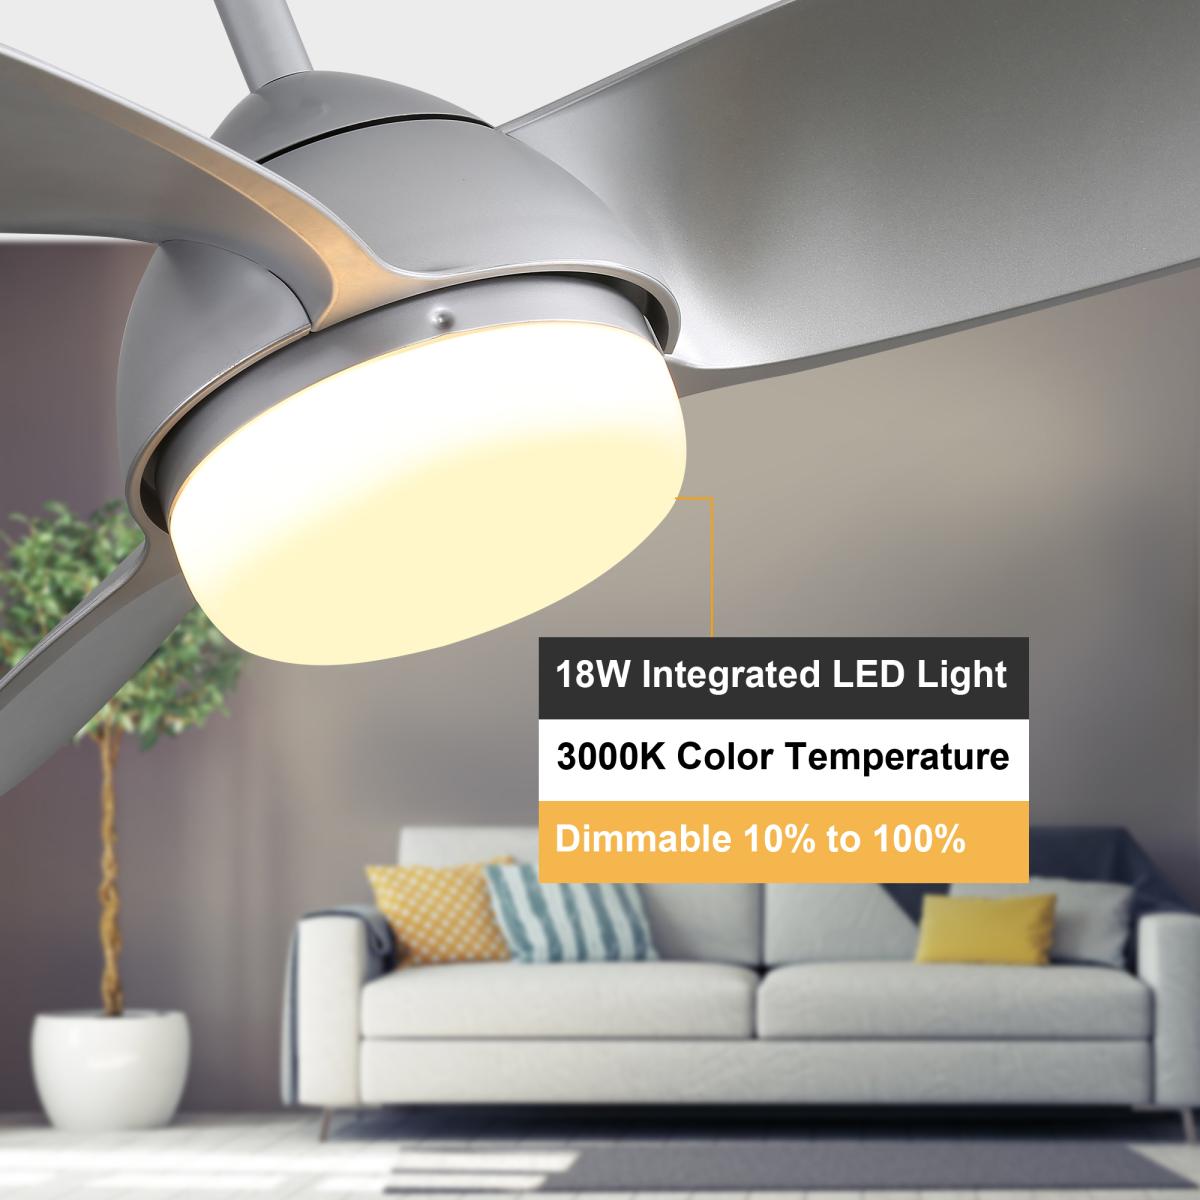 42 Inch Modern Abs Ceiling Fan With 6 Speed Remote Control Dimmable Reversible Dc Motor With Light